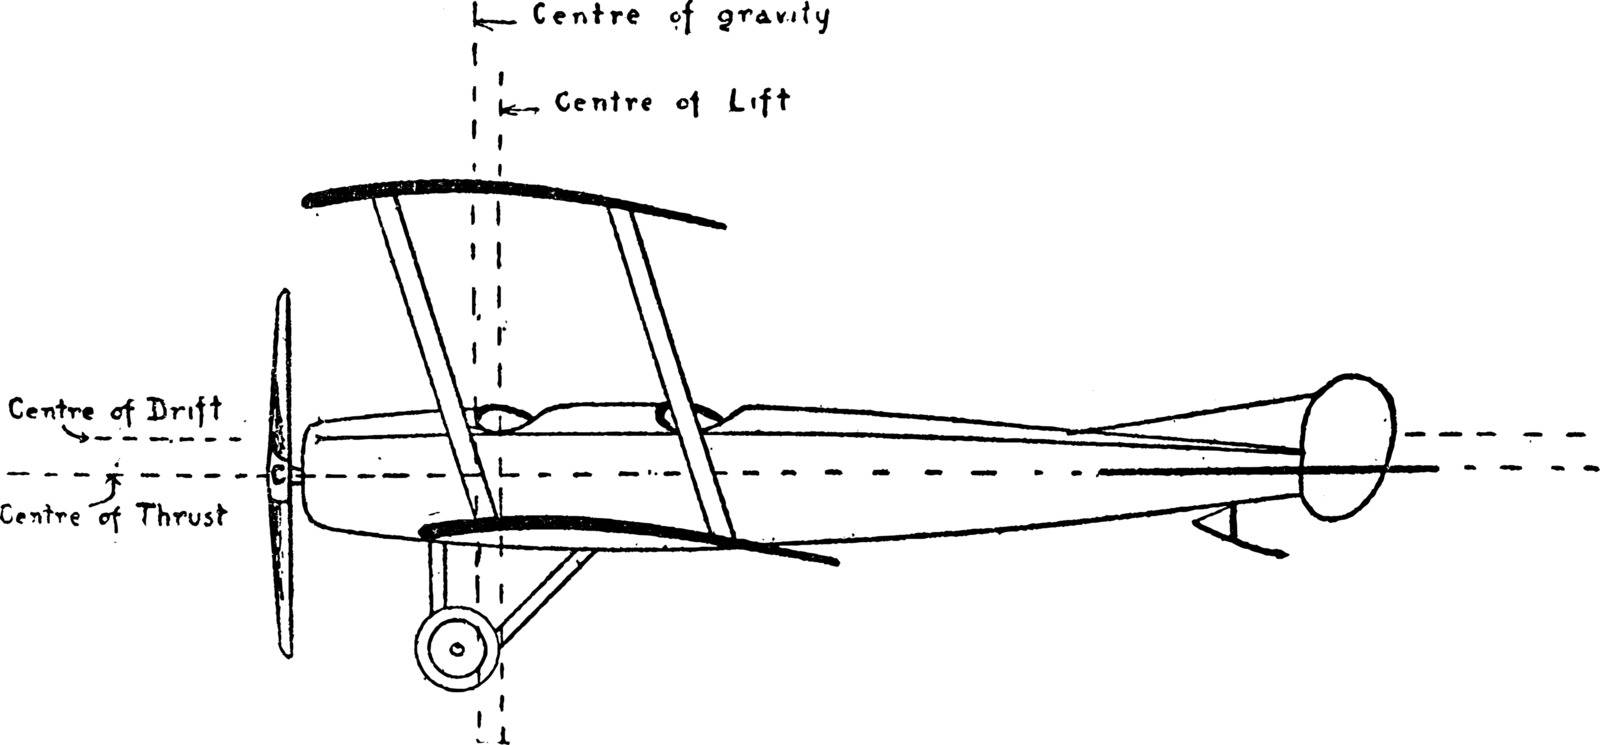 Centre of Gravity Lift Drift Thrust of Aeroplane in which lift drift and thrust to effectively glide the plane when the engine stalls, vintage line drawing or engraving illustration.